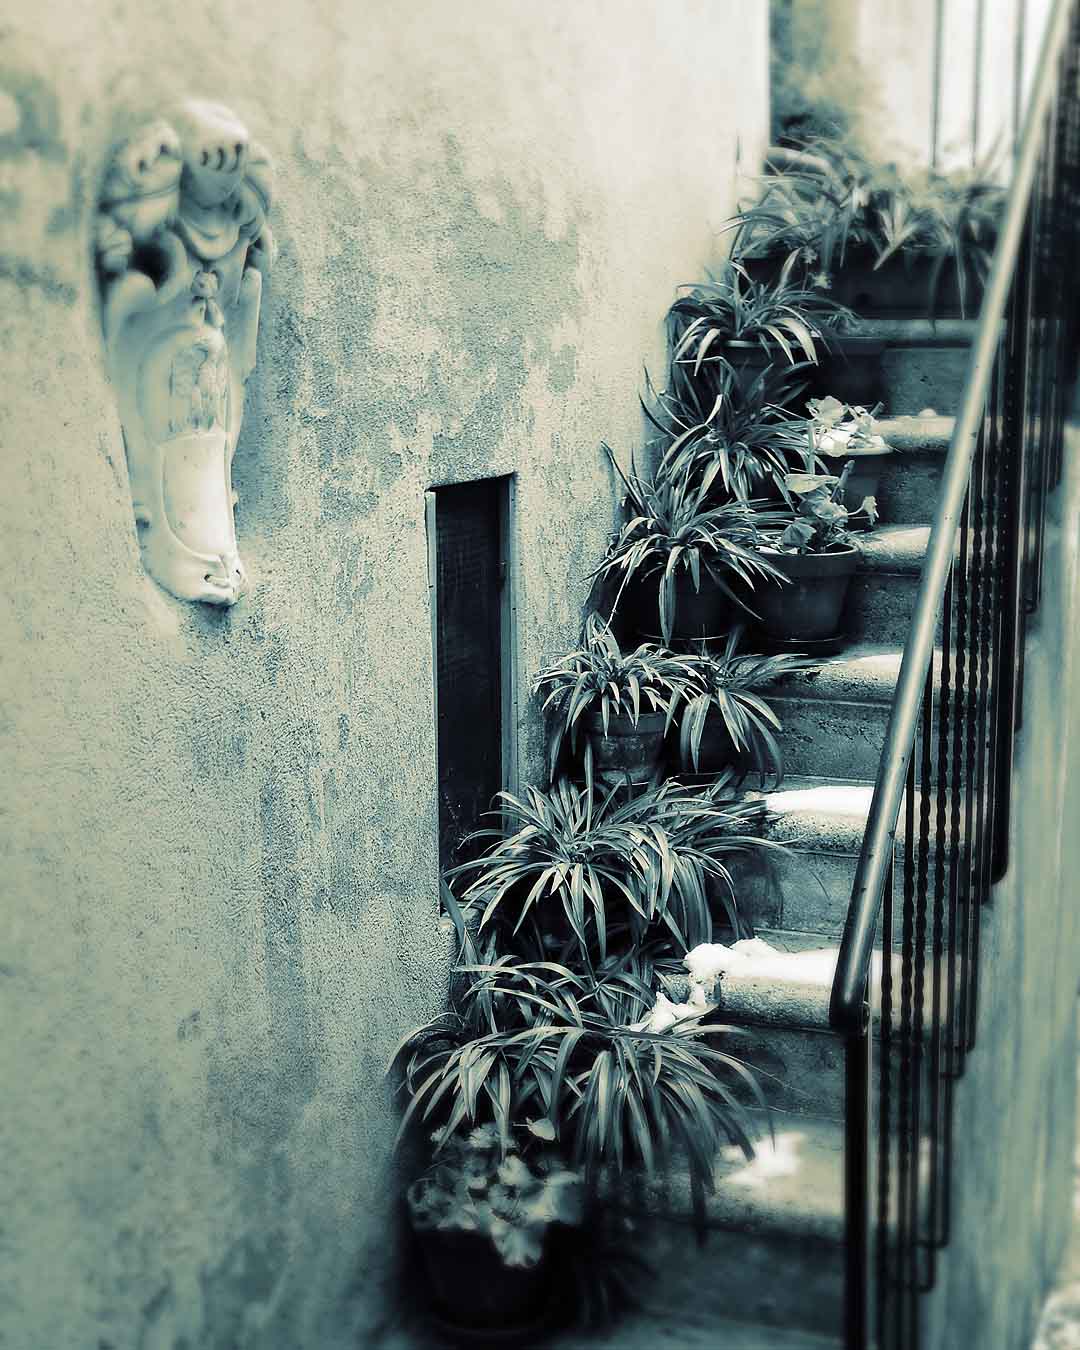 Plants on stairs #1, Montepulciano, Italy, 2008